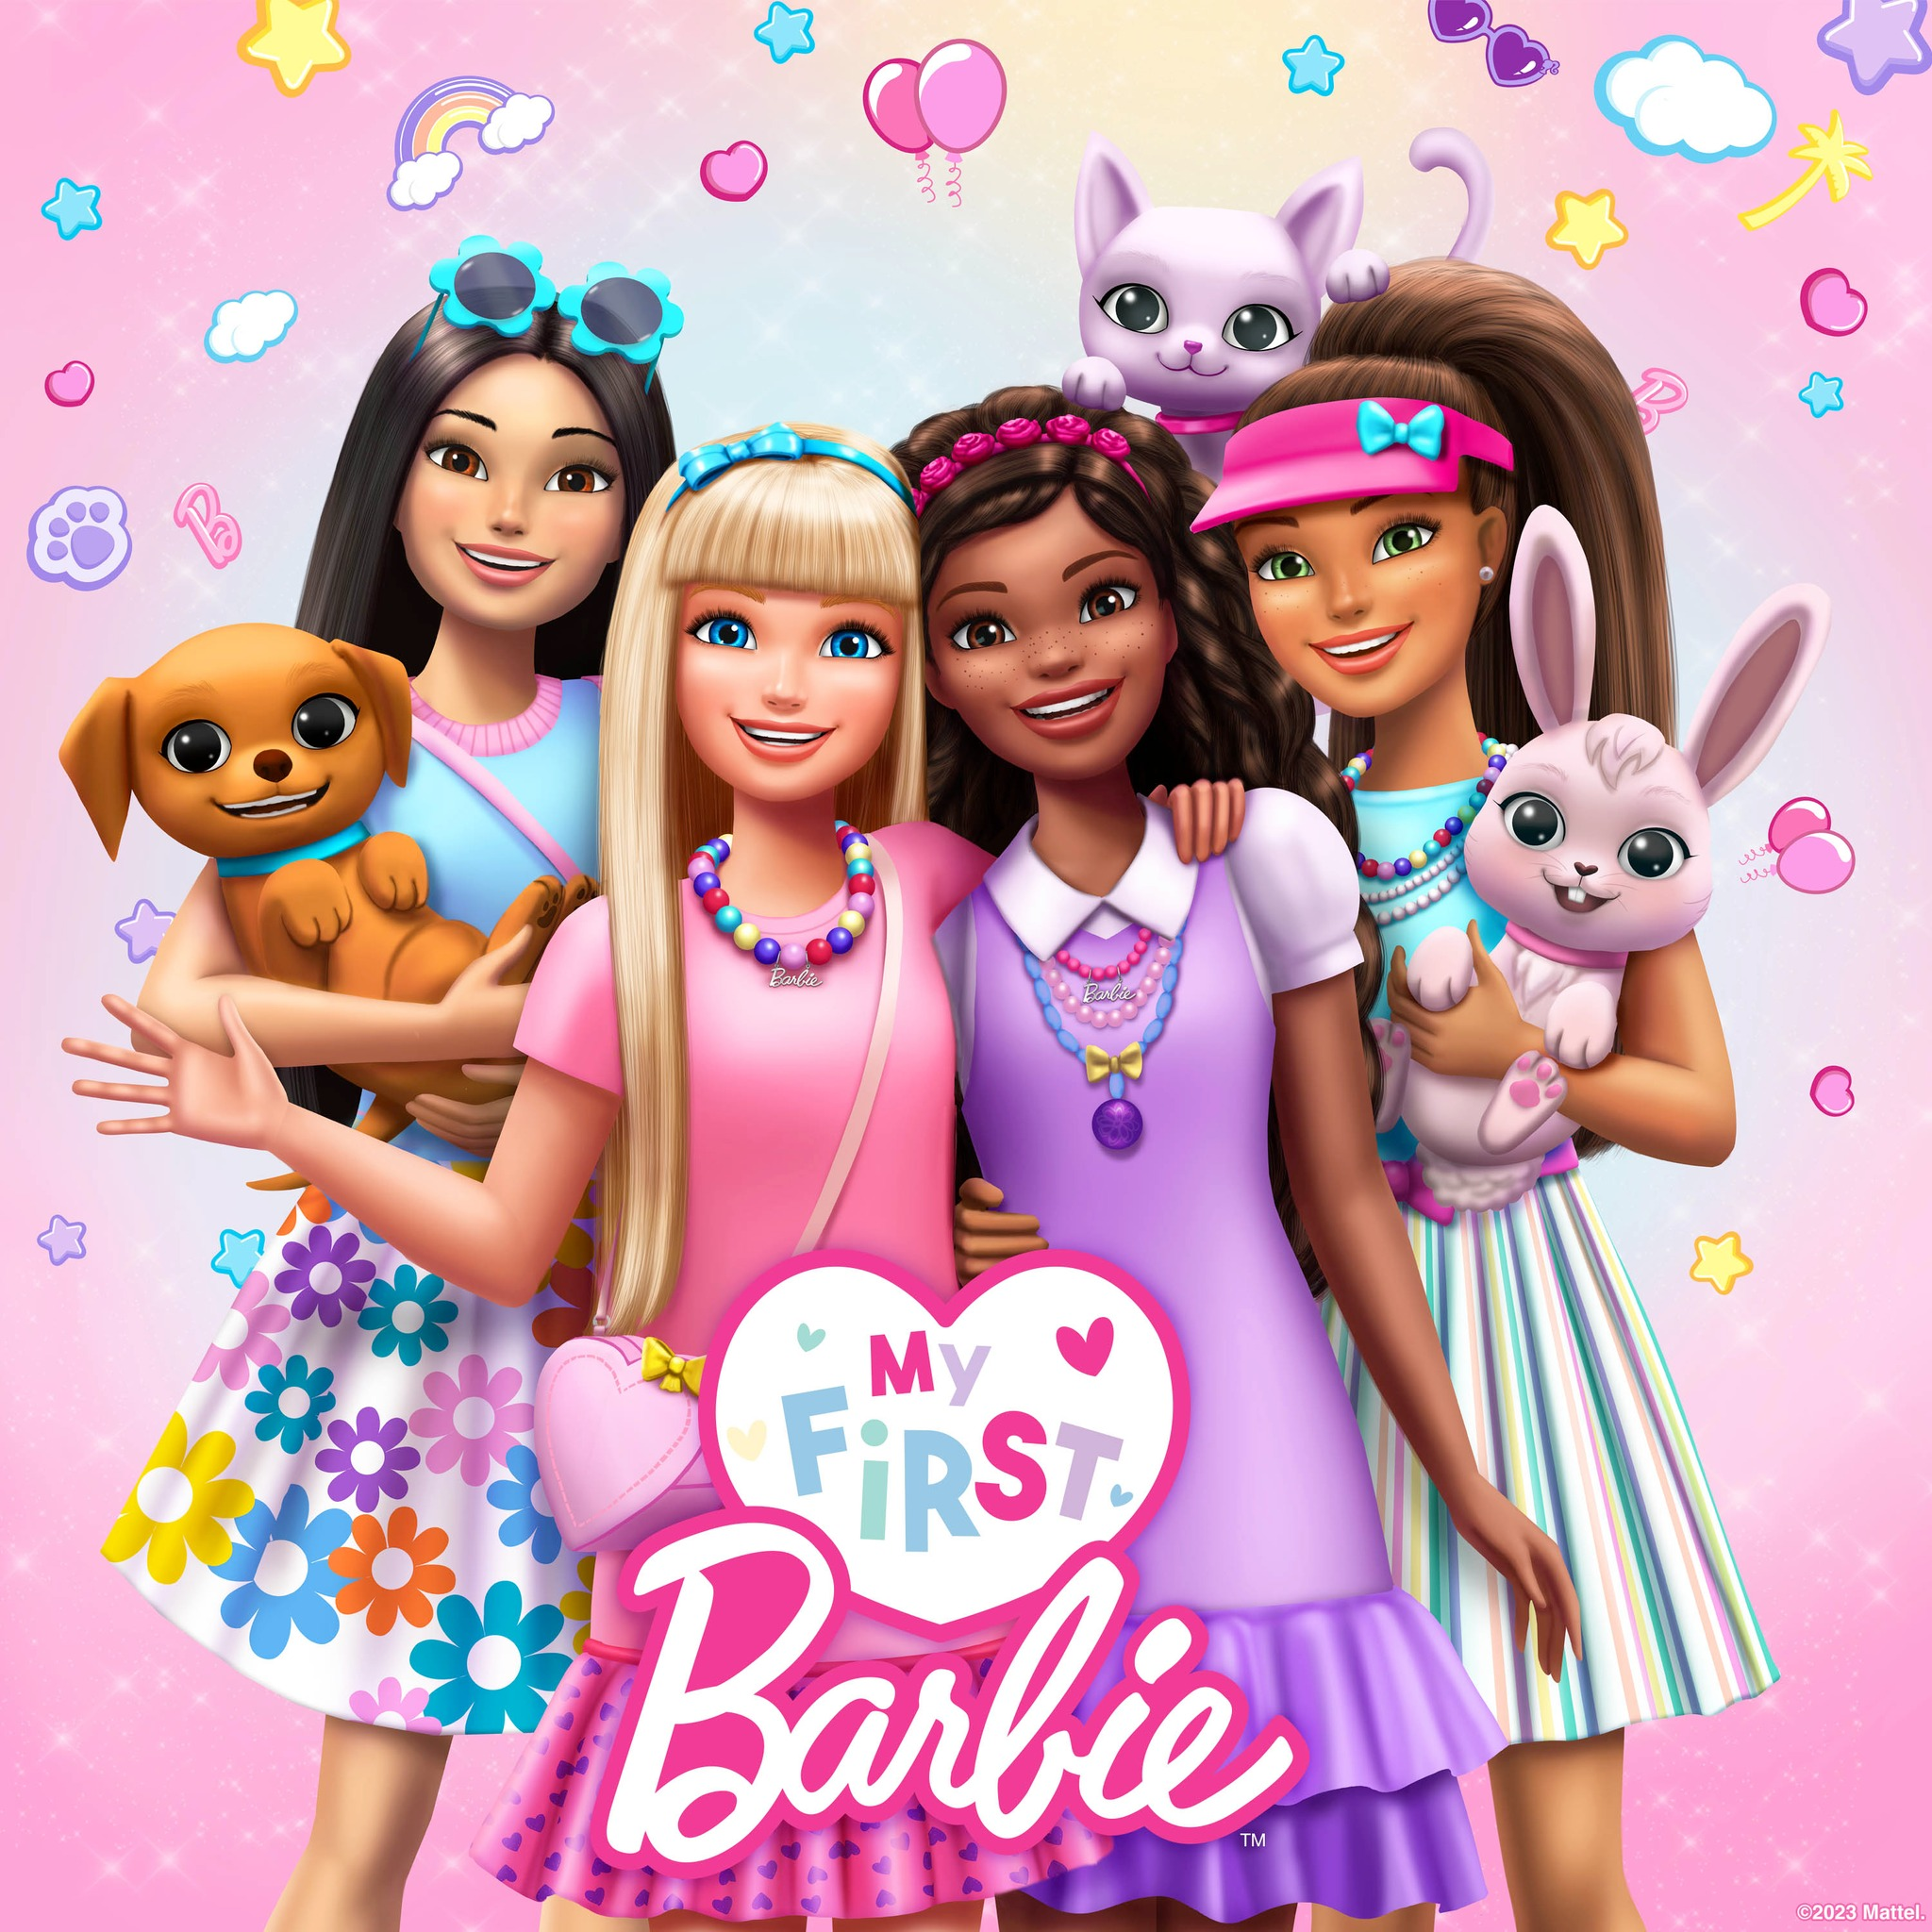 det er smukt kranium virkelighed My First Barbie: Happy DreamDay My First Barbie animated special -  YouLoveIt.com